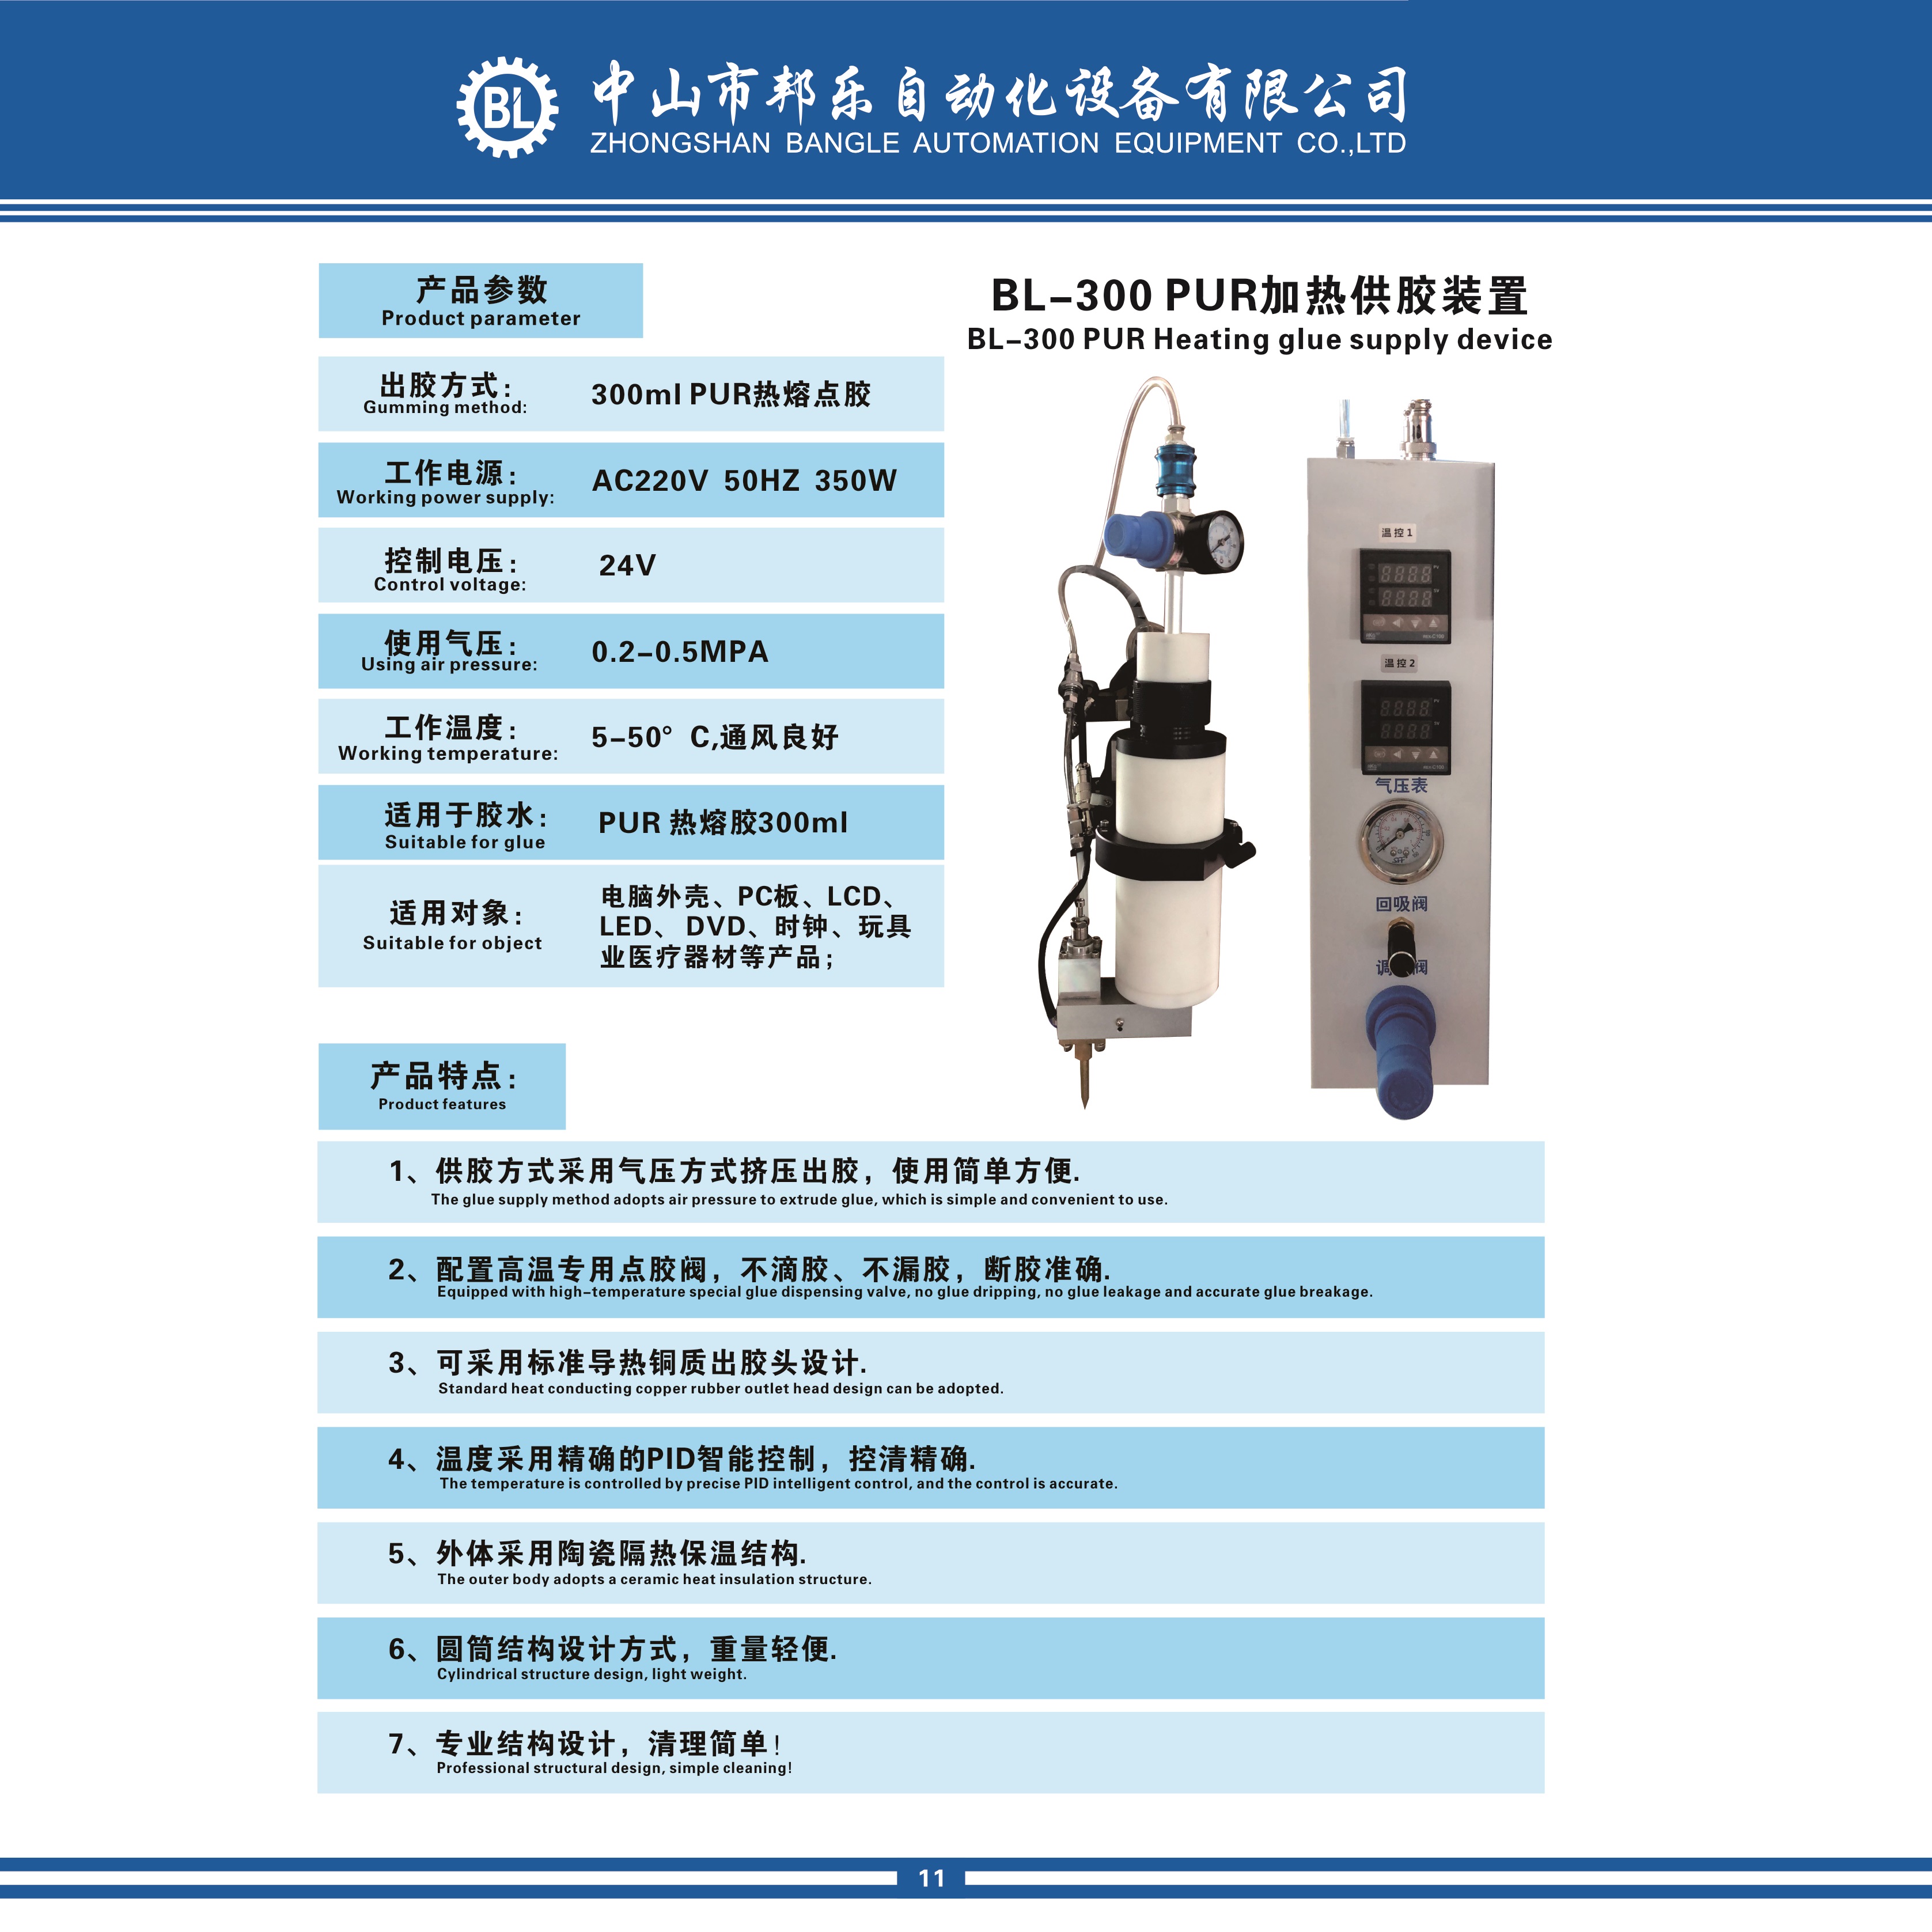 Bl-300 PUR heating glue supply device